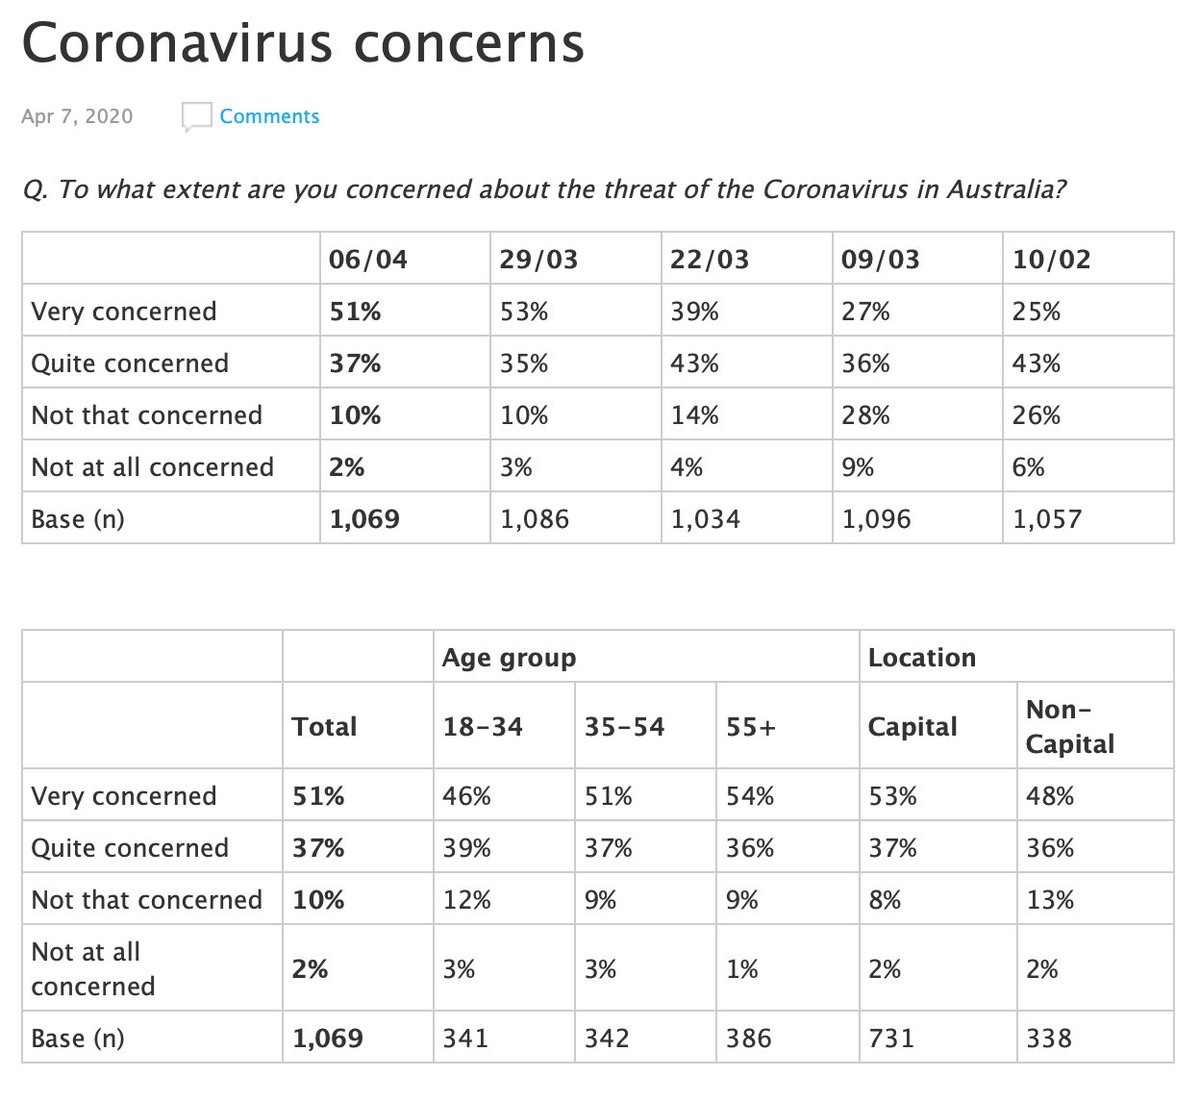 “Q. To what extent are you concerned about the threat of the Coronavirus in Australia?” Basically the same within margin of error.  https://essentialvision.com.au/coronavirus-concerns-4